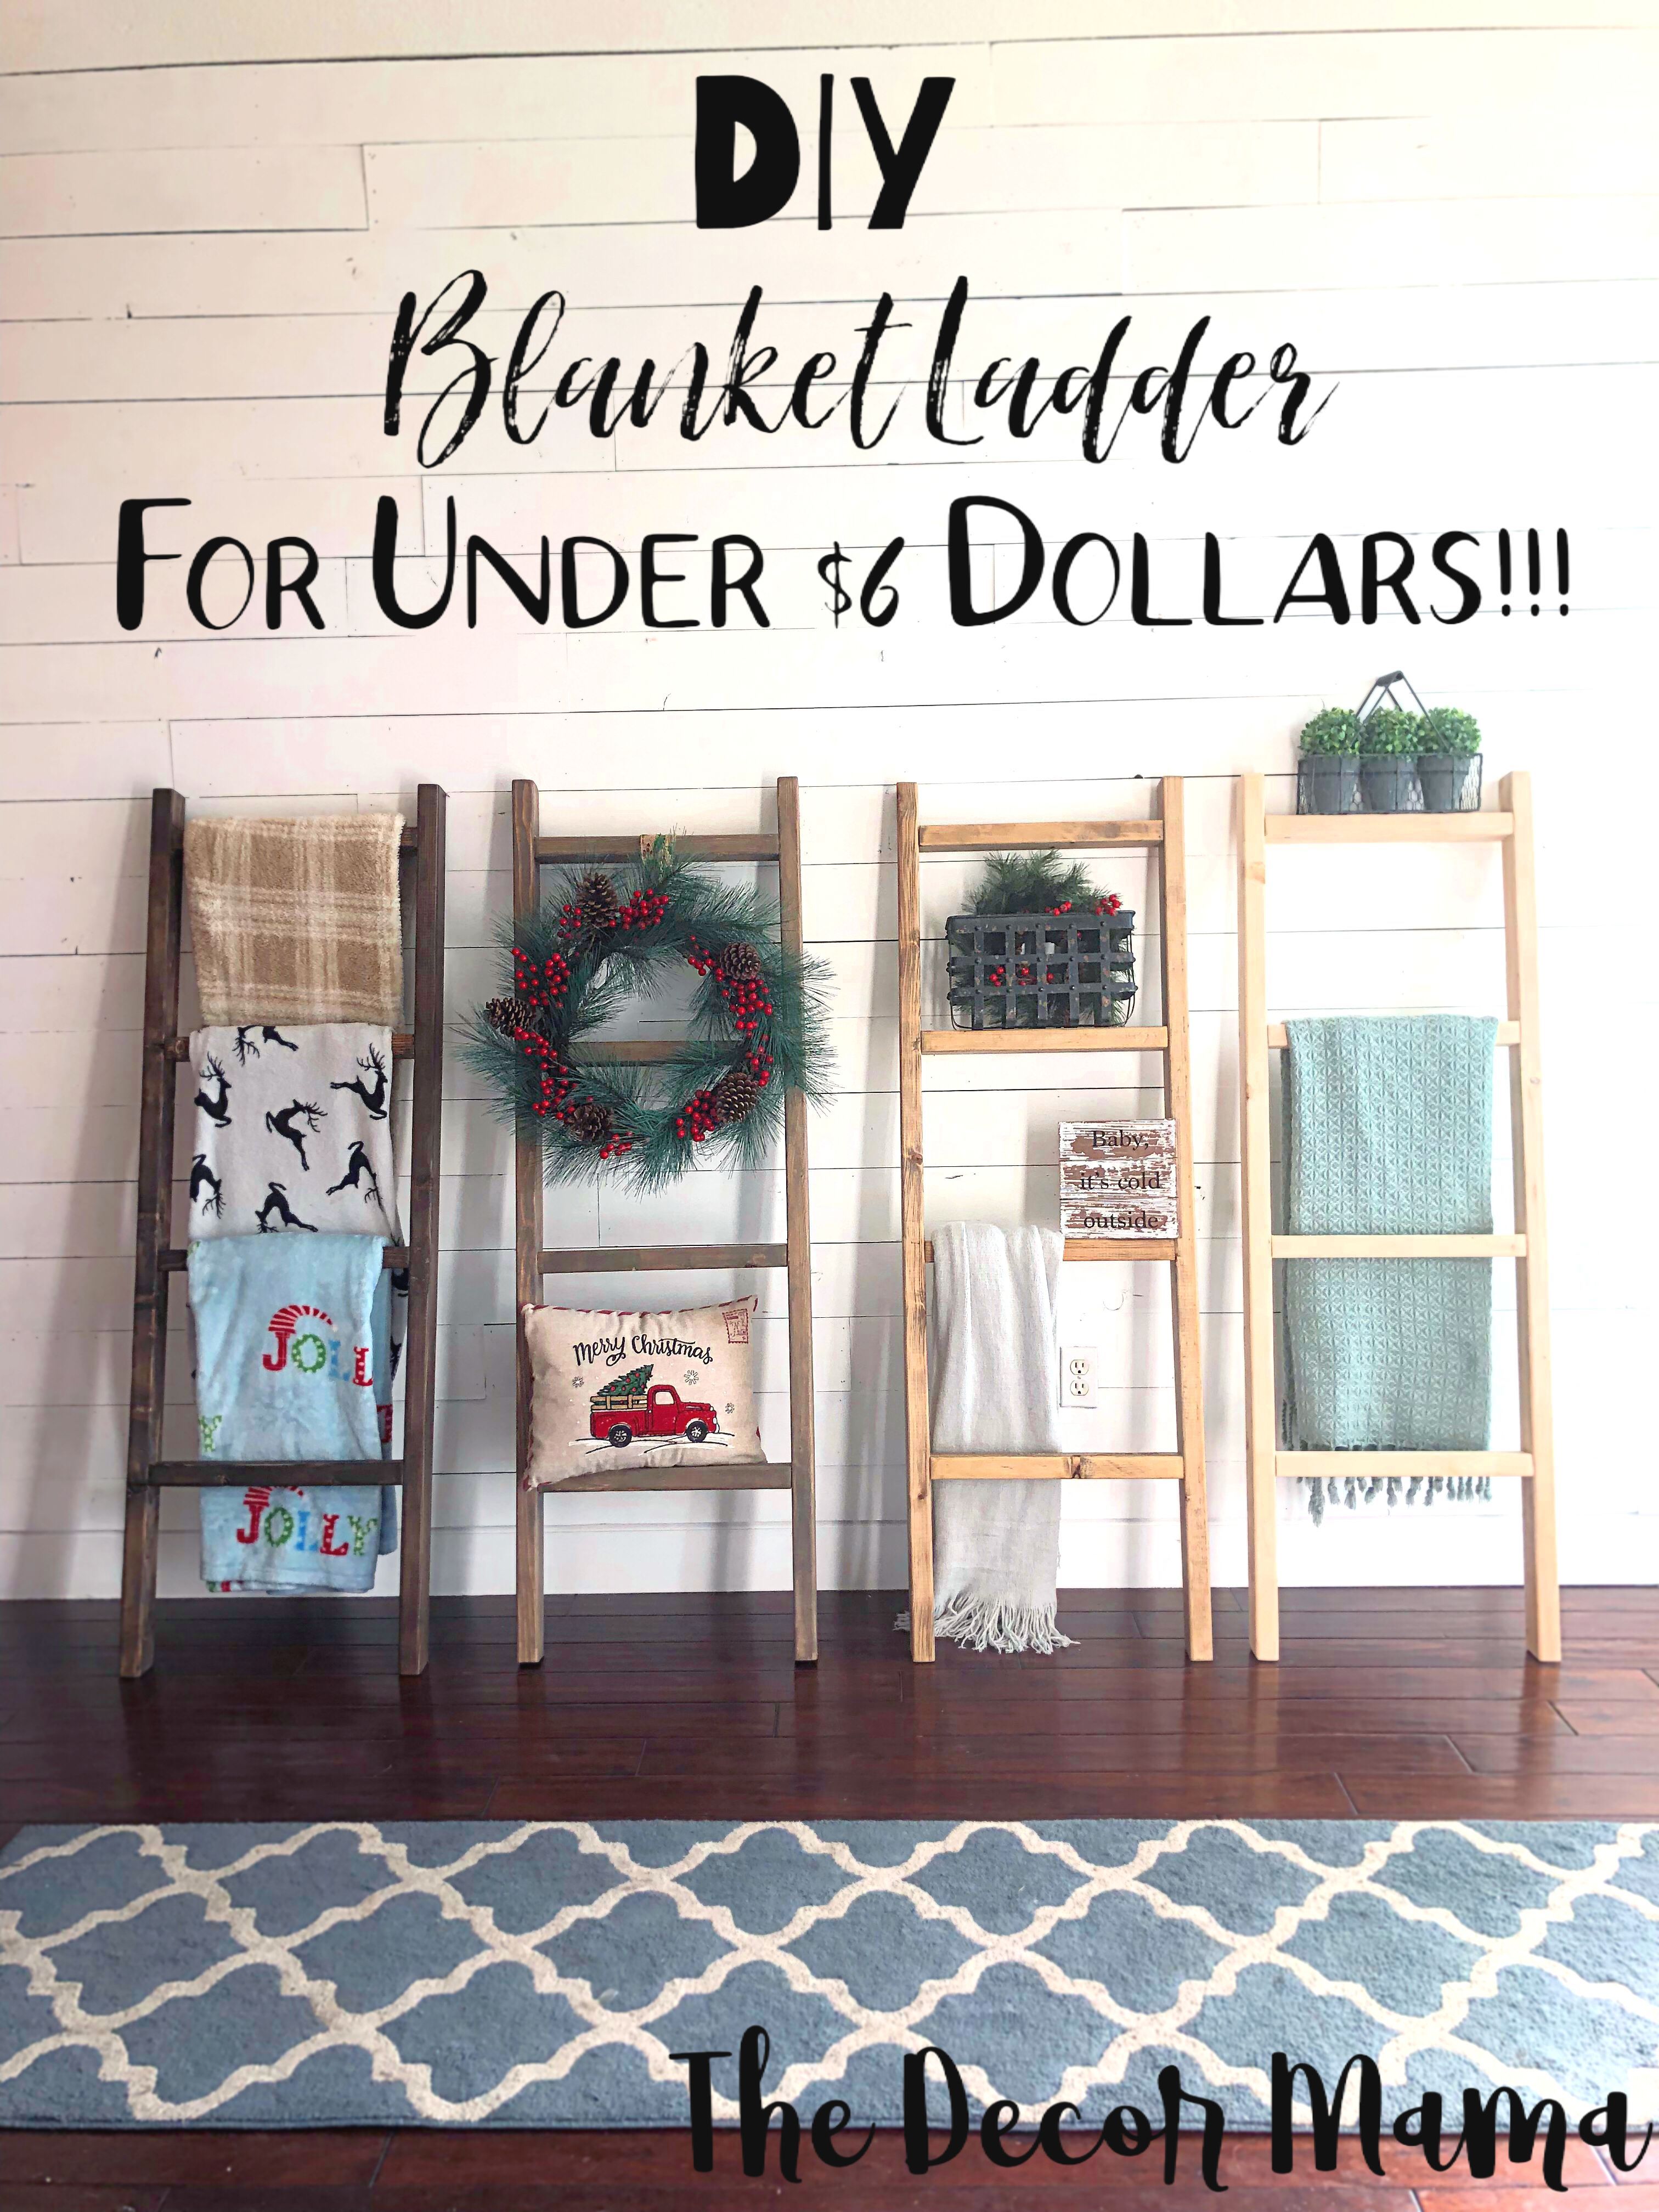 DIY Blanket Ladder for Under $6!!! - The Decor Mama -   23 diy projects Decoration how to make
 ideas